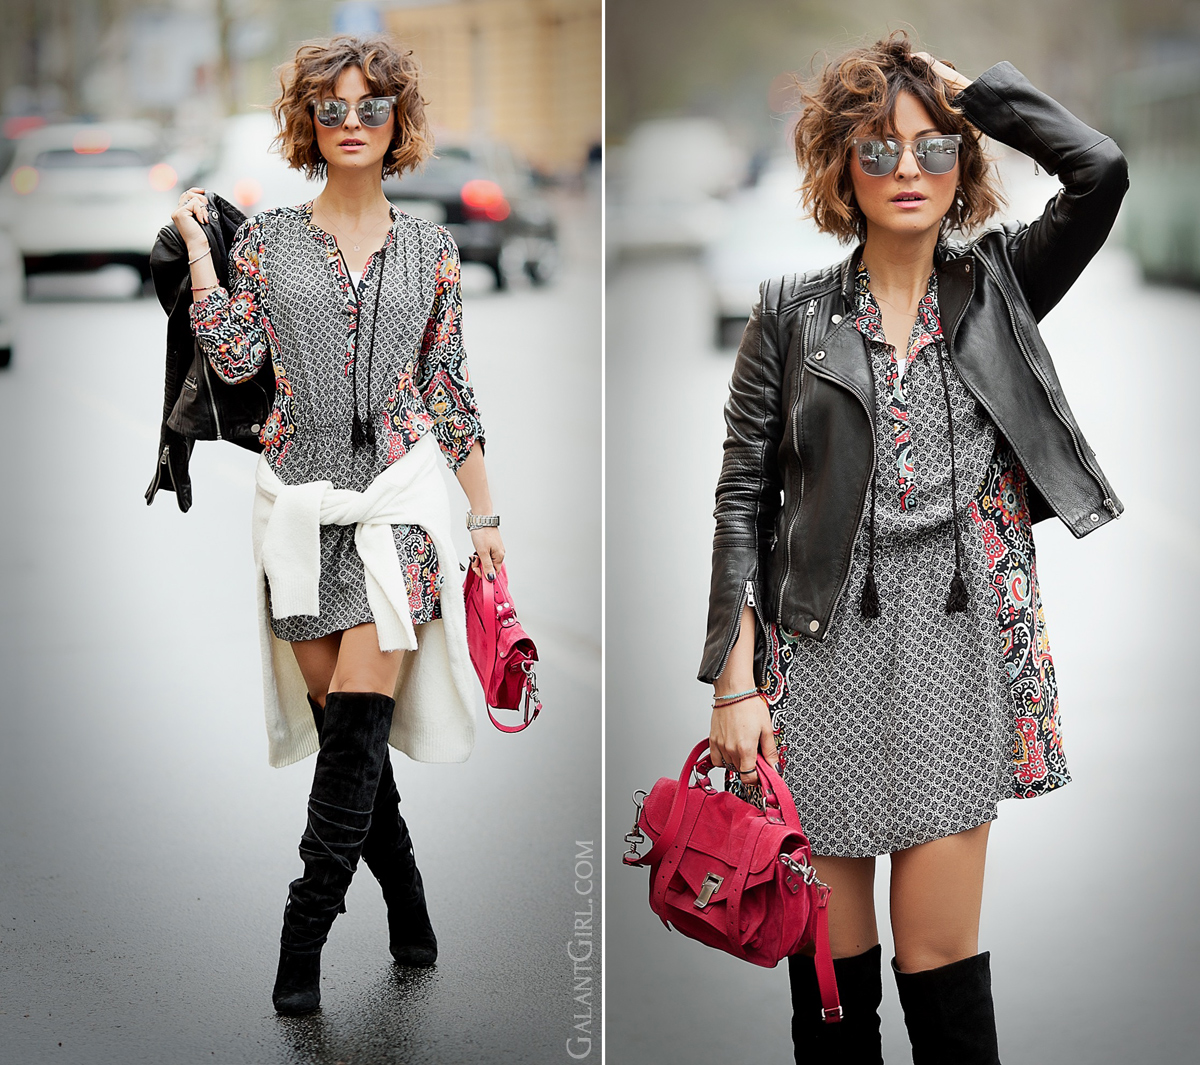 cute dress outfit with high boots and bikers jacket on street style blogger GalantGirl.com